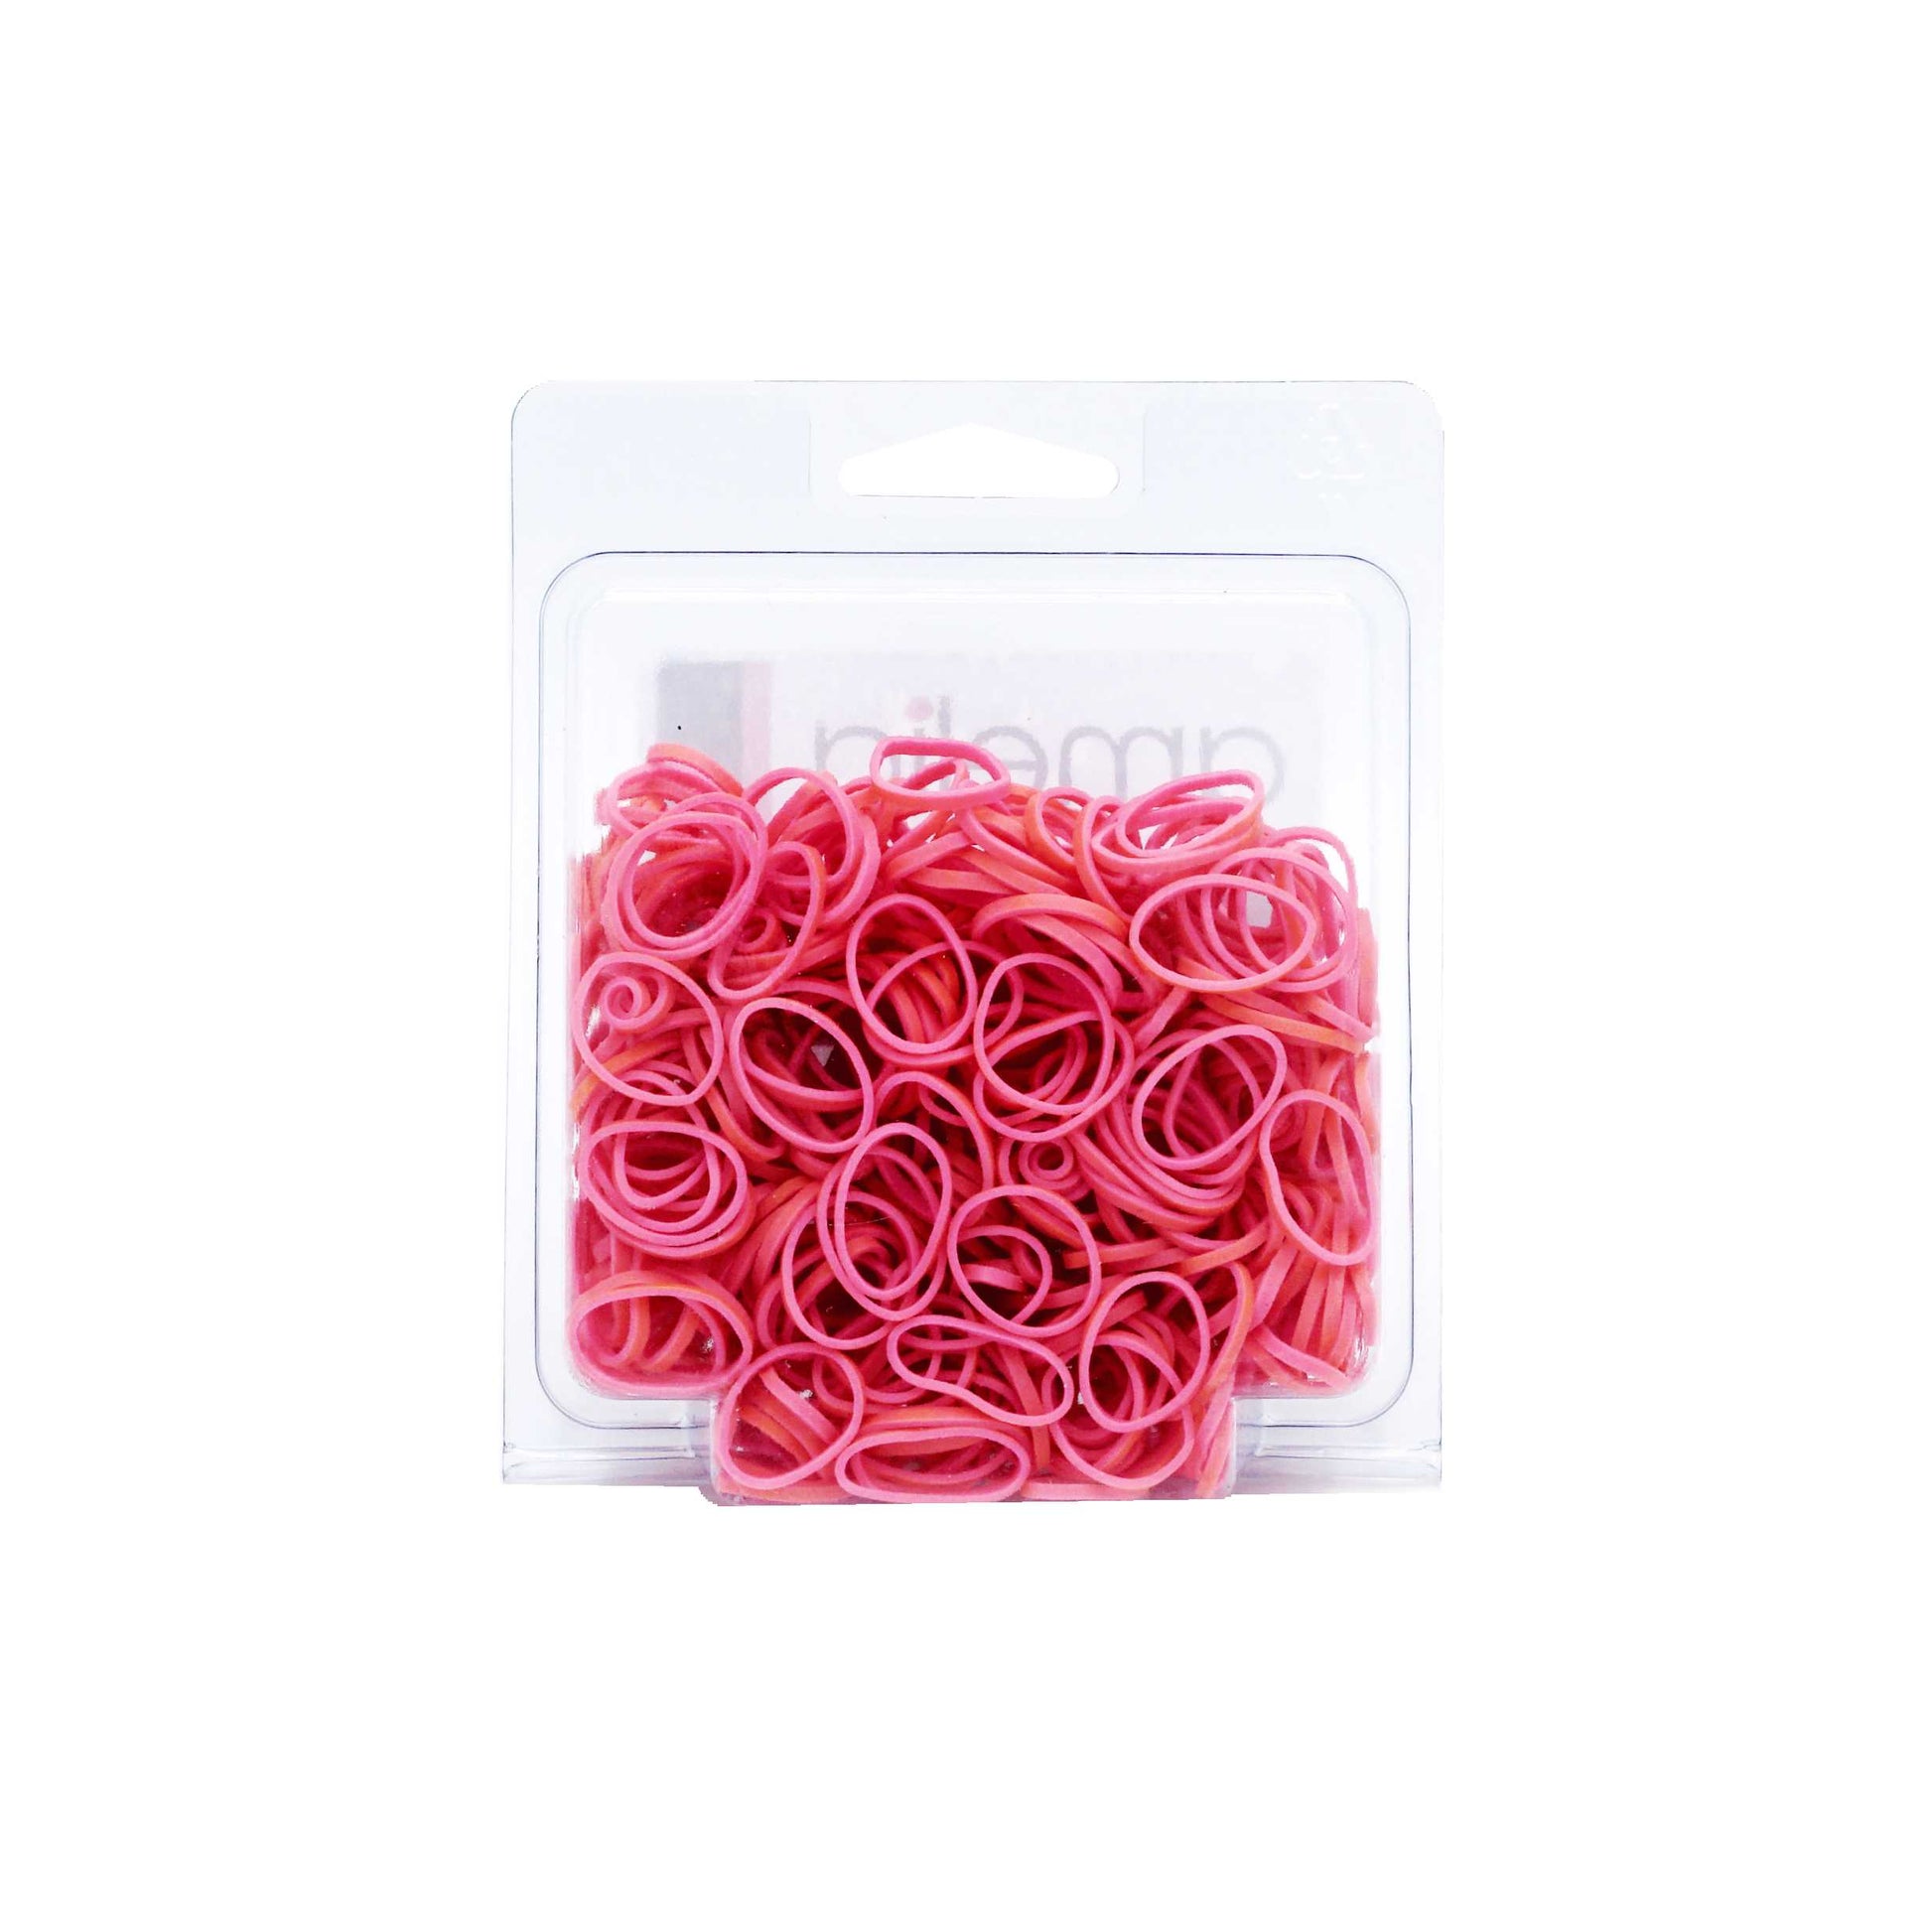 Amelia Beauty 1000, Red, Standard size, US Made Rubber Hair Bands for Pony Tails and Braids